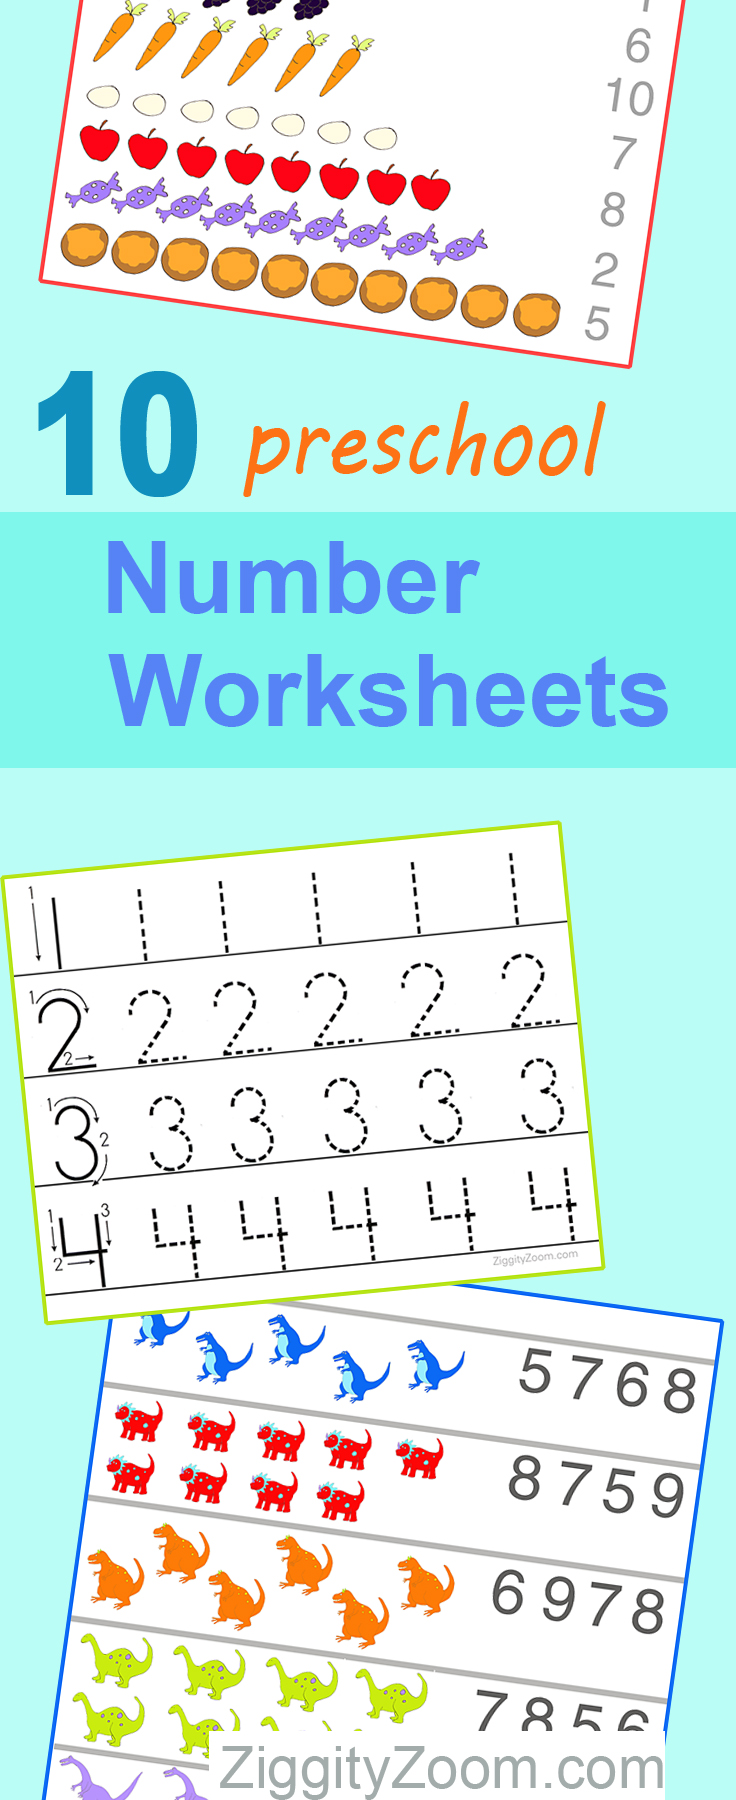 10 Preschool Math Worksheets- Number Recognition, Flashcards, Tracing